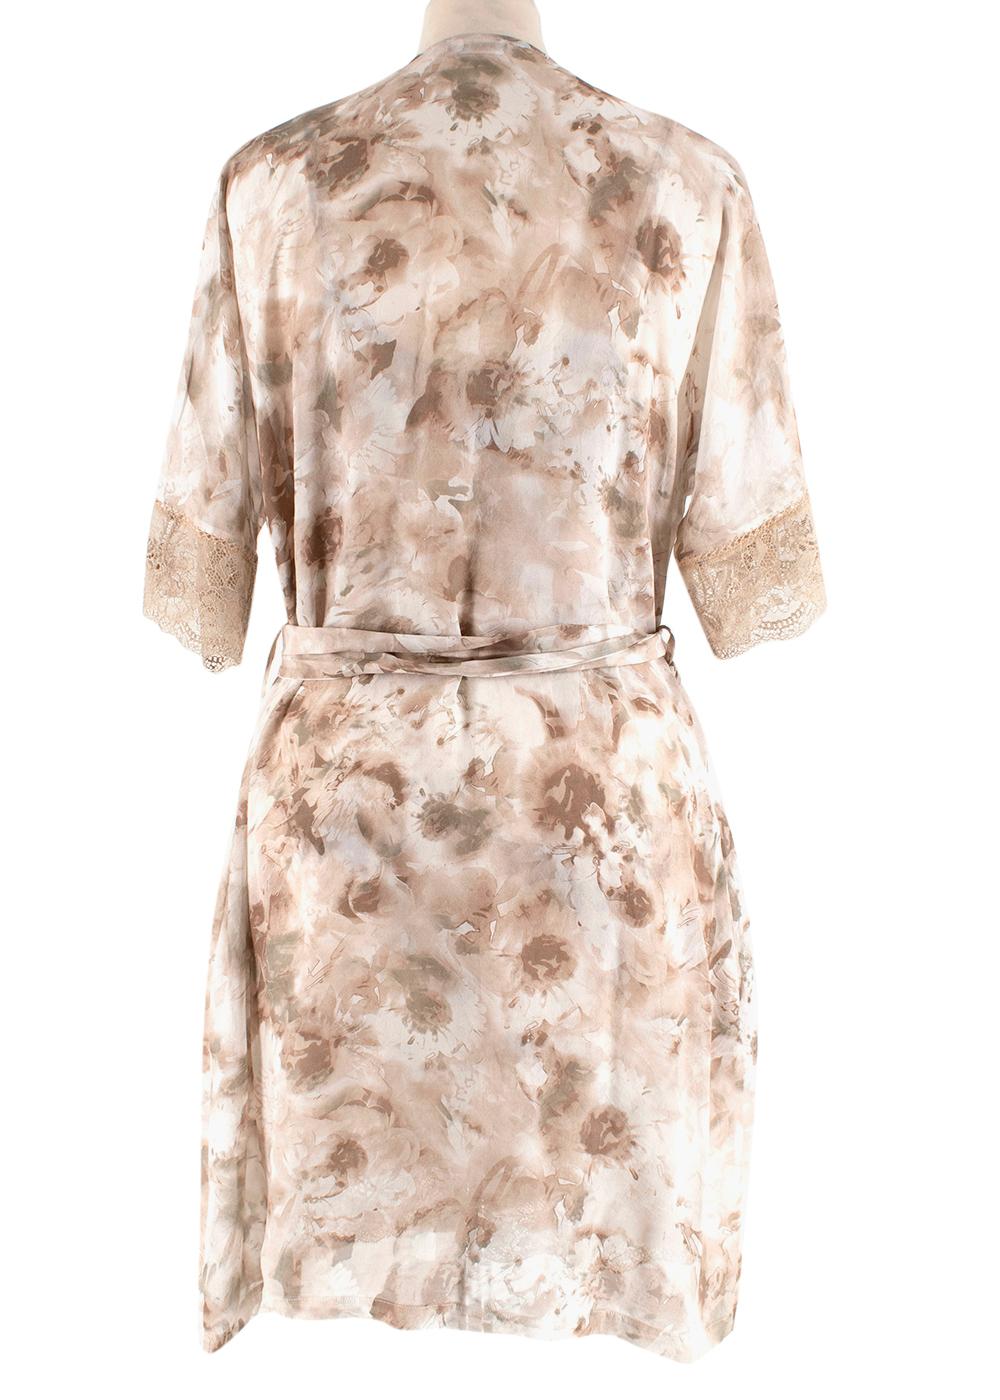 La Perla Floral Print Nude Night Dress & Robe

- Night robe with matching dress 
- Size 2 (UK 10-12)
- Robe has quarter length sleeves
- V neck top with nude coloured lace
- Sheer fabric with floral design
- Light weight fabric
- Textured silk
-